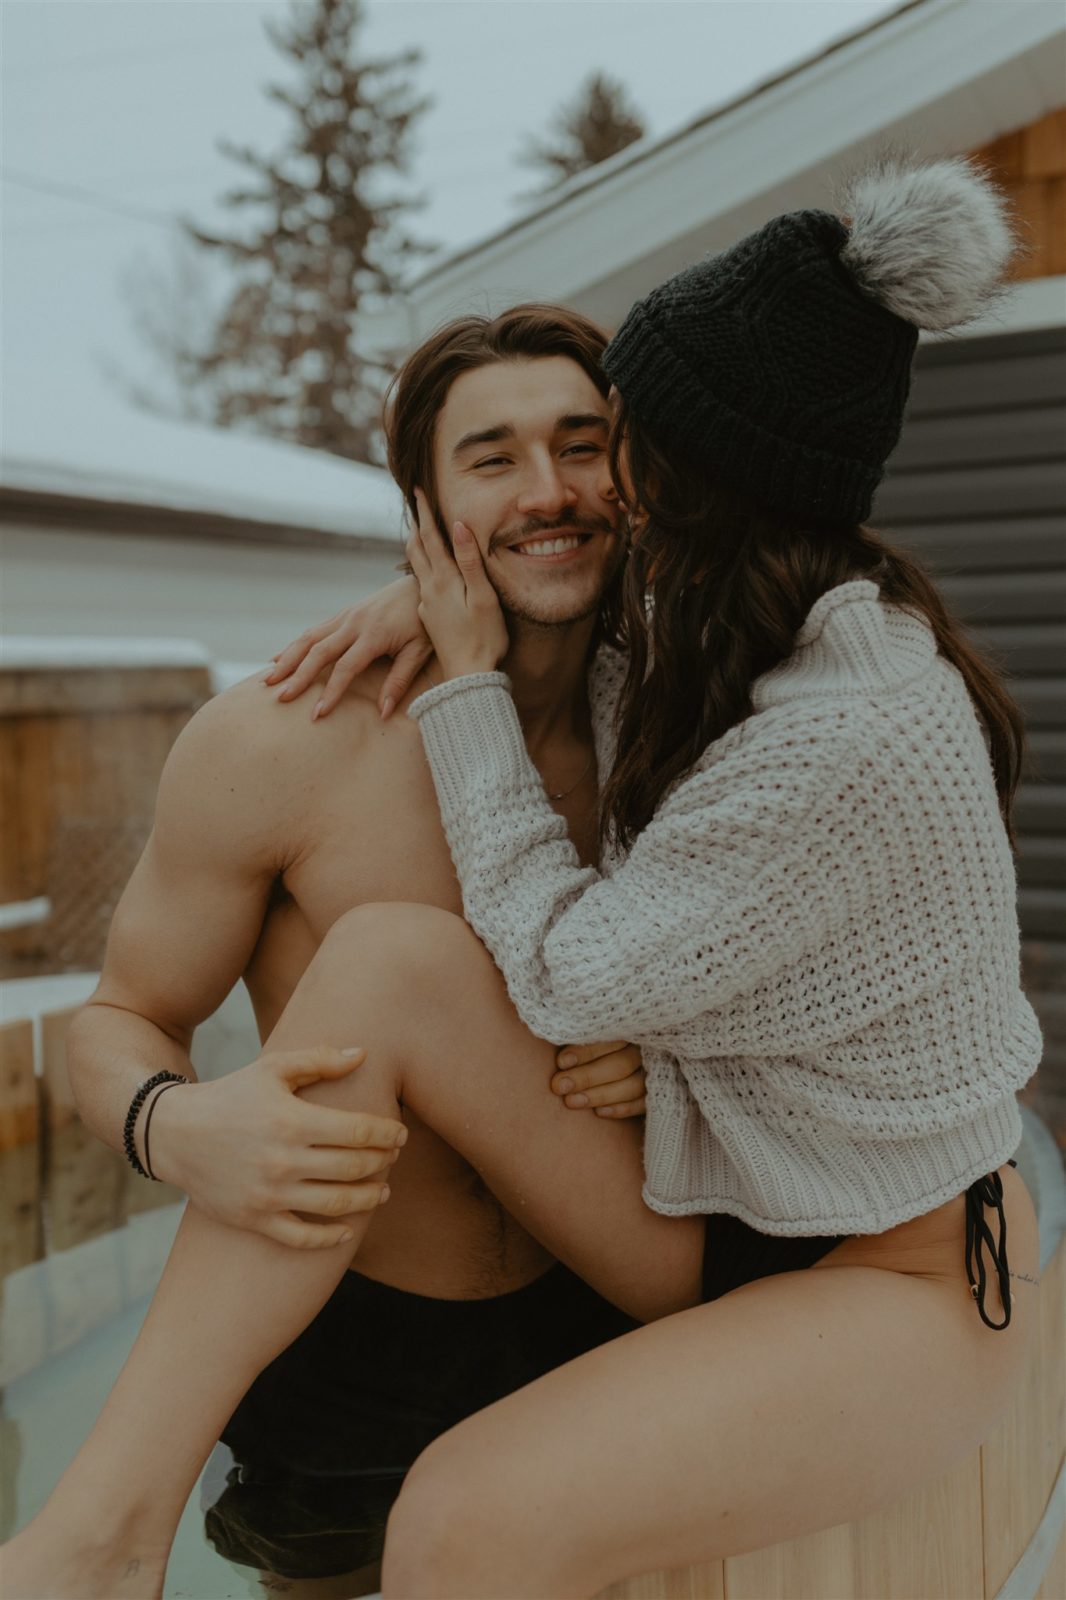 Engagement session activity with hot tub, toques, and sweaters